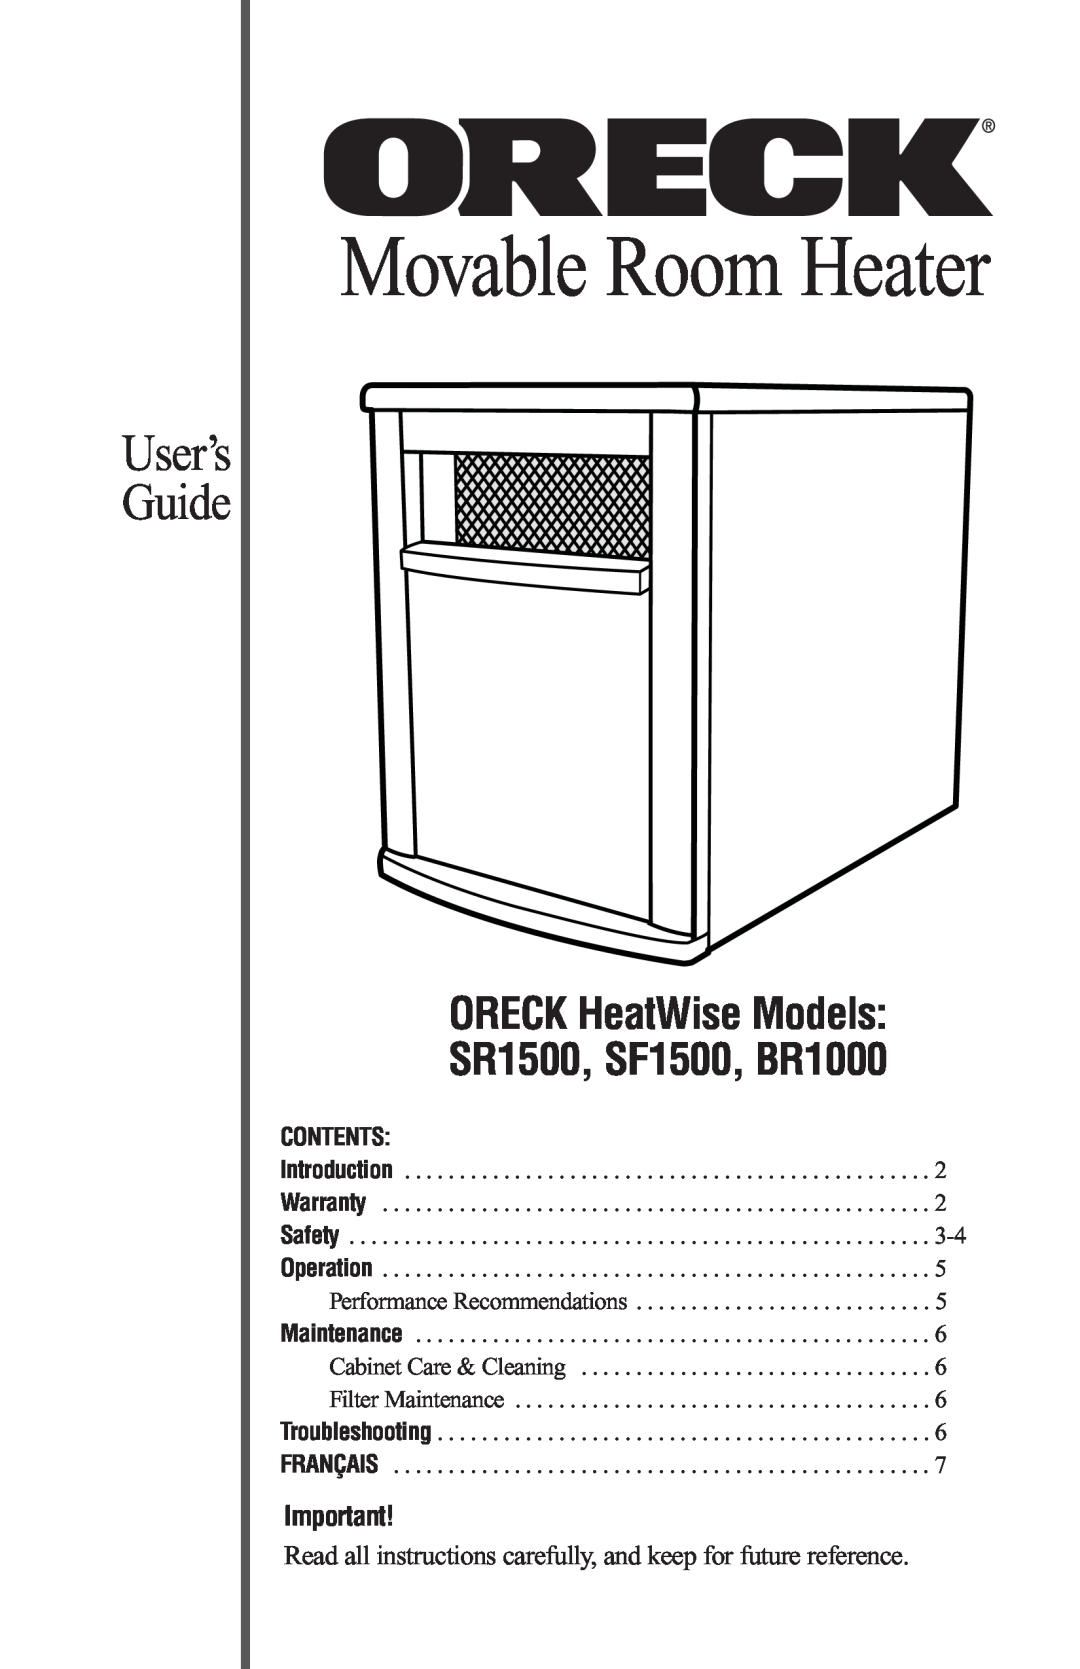 Oreck warranty Movable Room Heater, ORECK HeatWise Models SR1500, SF1500, BR1000, User’s Guide, Contents 